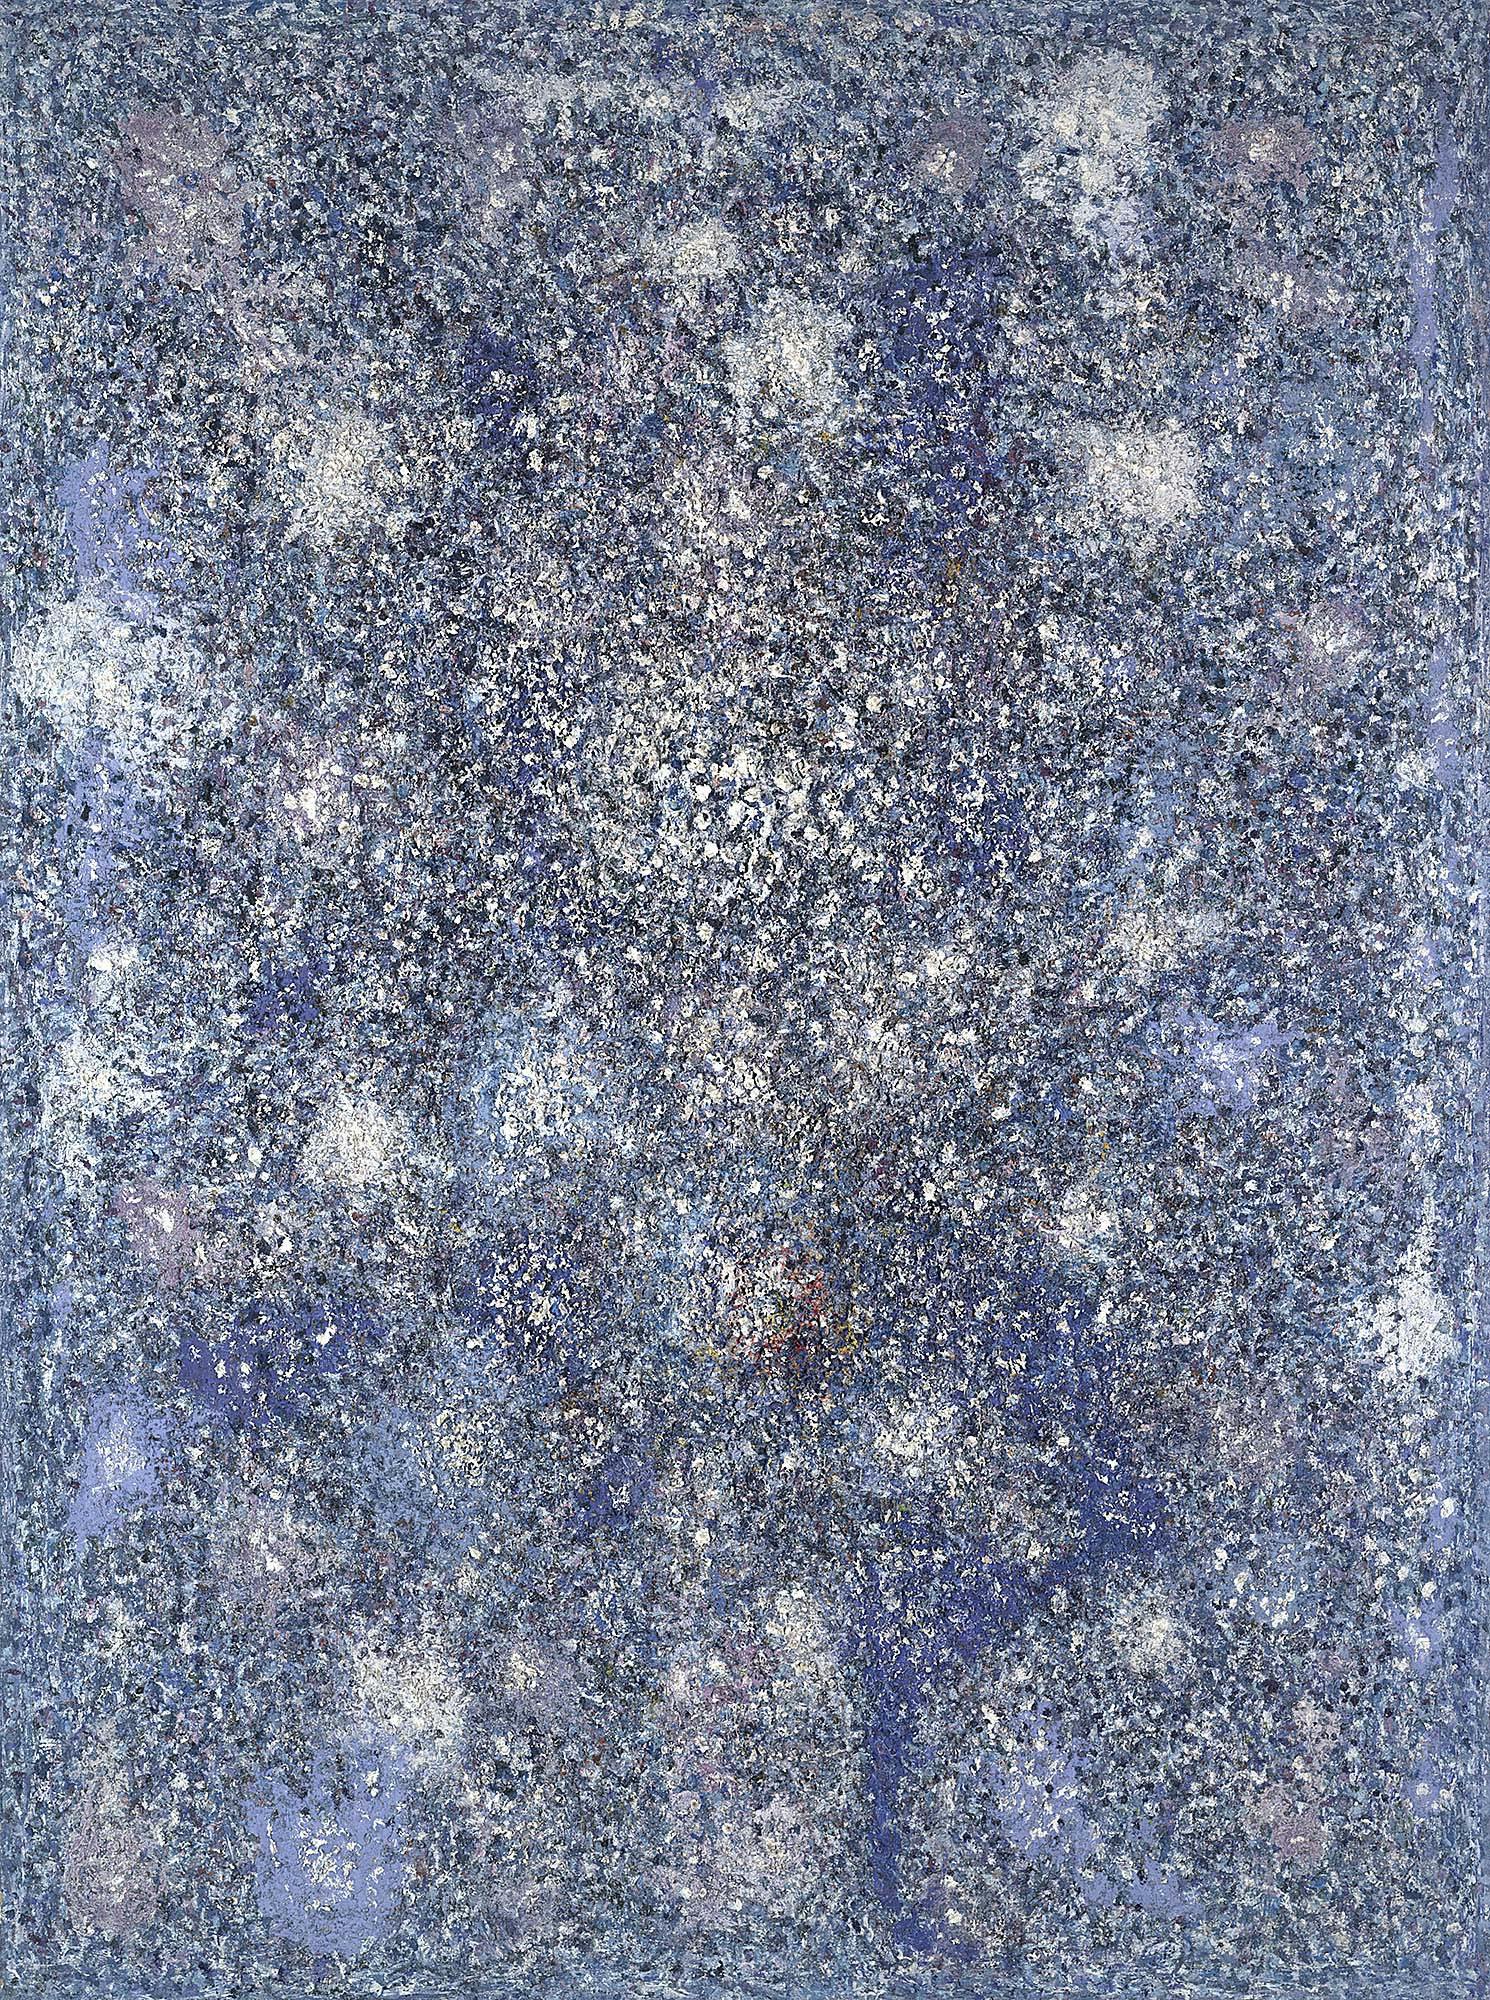 Blue Presence Number 1
1960
Oil on canvas
75 1/2 x 56 1/4 in. (191.8 x 142.9 cm) 
Yale University Art Gallery, New Haven, Conn., Bequest of Susan Morse Hilles (2002.145.28)
 – The Richard Pousette-Dart Foundation